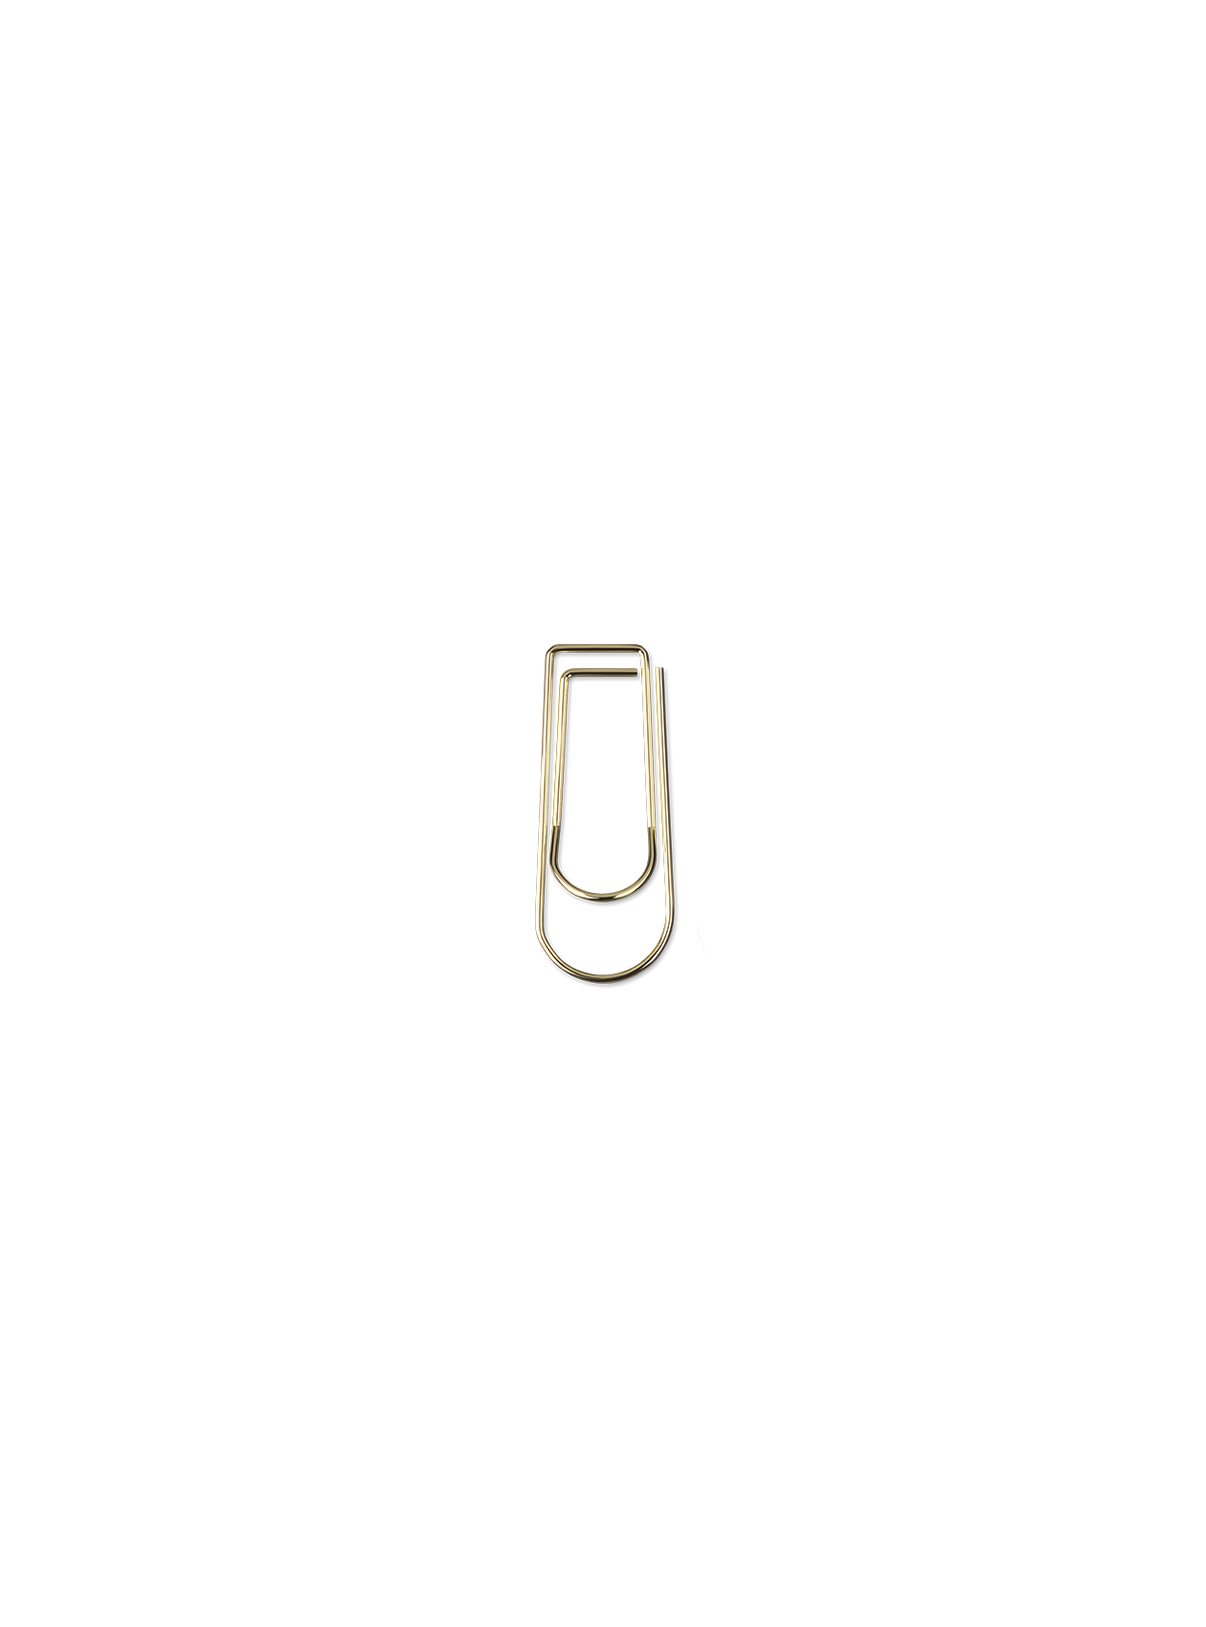 Pen Hook Clip in gold wire-o binding || Gold